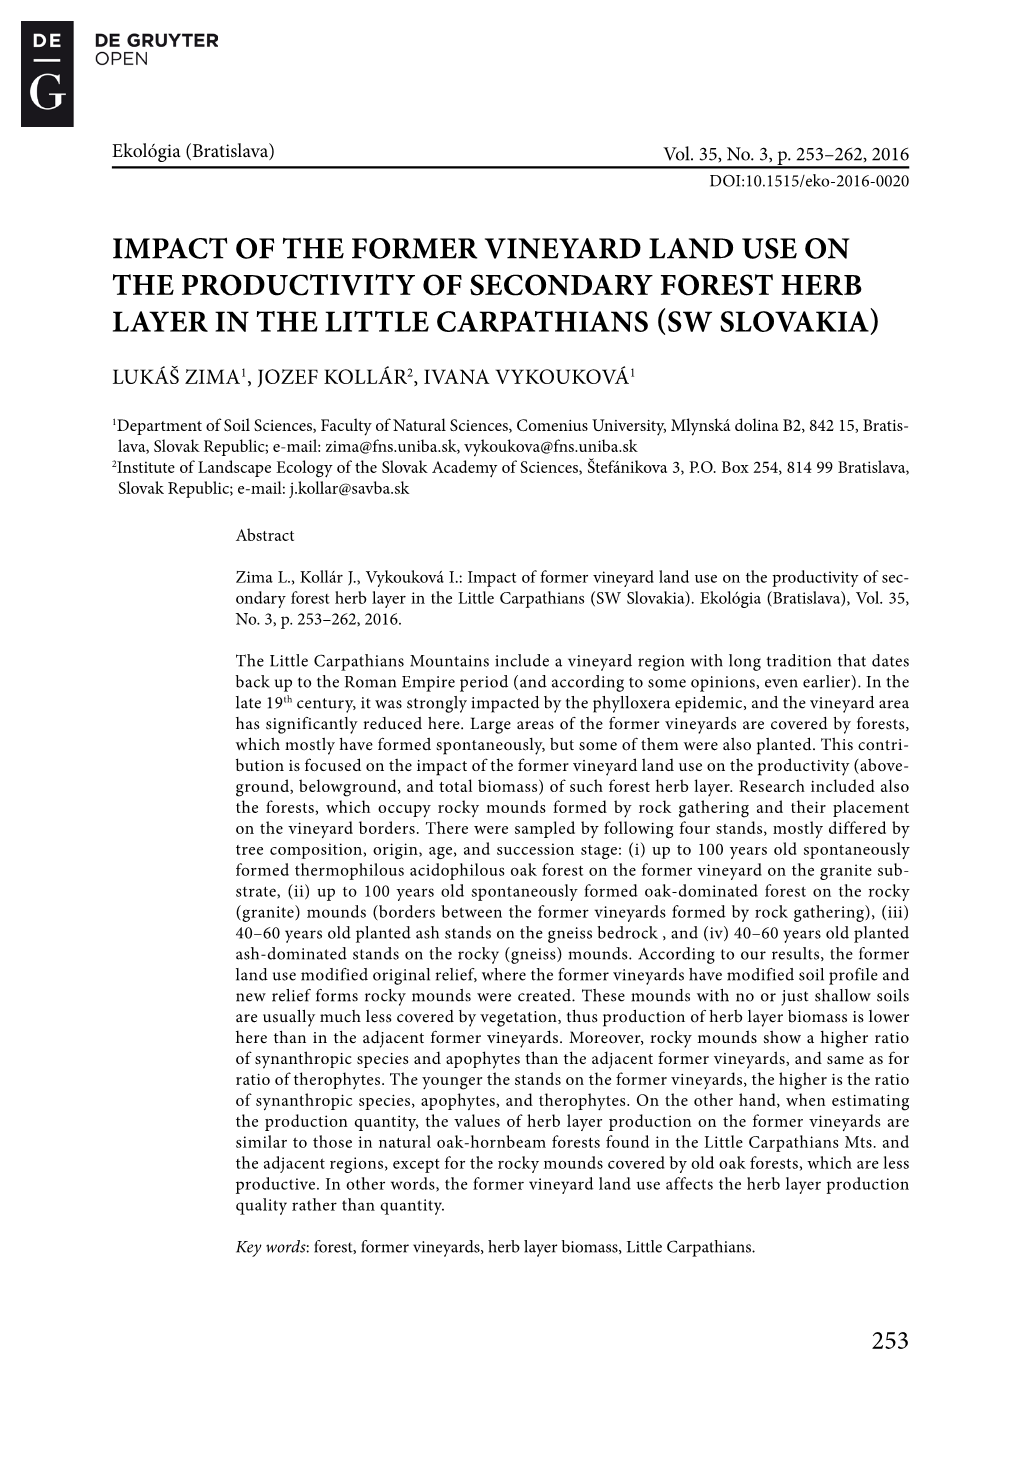 Impact of the Former Vineyard Land Use on the Productivity of Secondary Forest Herb Layer in the LITTLE CARPATHIANS (SW SLOVAKIA)